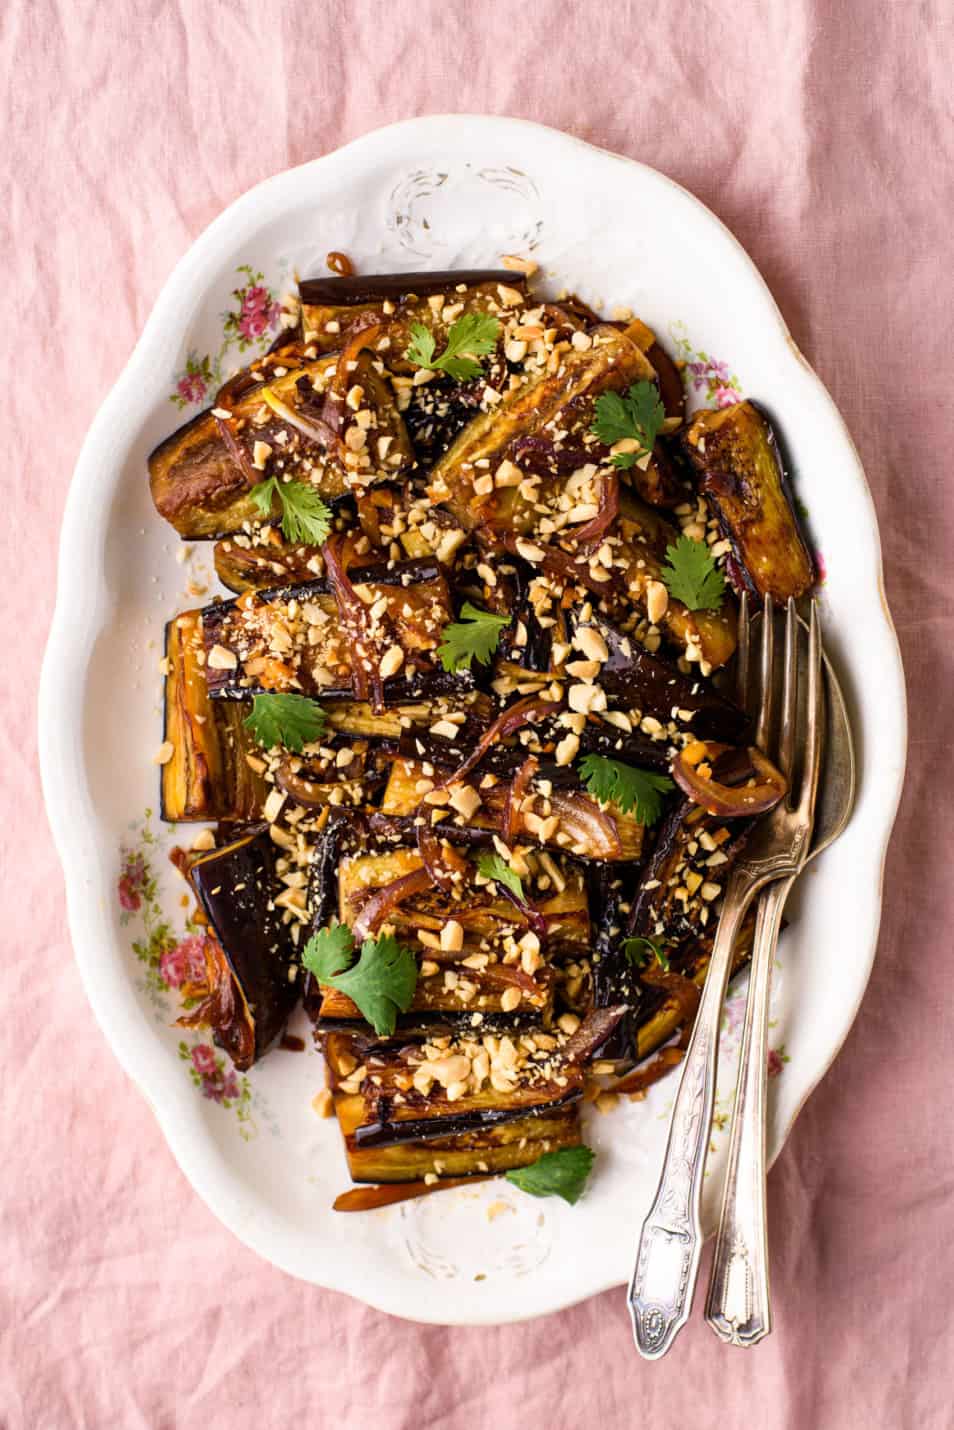 Soy-glazed pan-fried eggplant sprinkled with crushed peanuts and cilantro on a vintage oval platter on a pink tablecloth